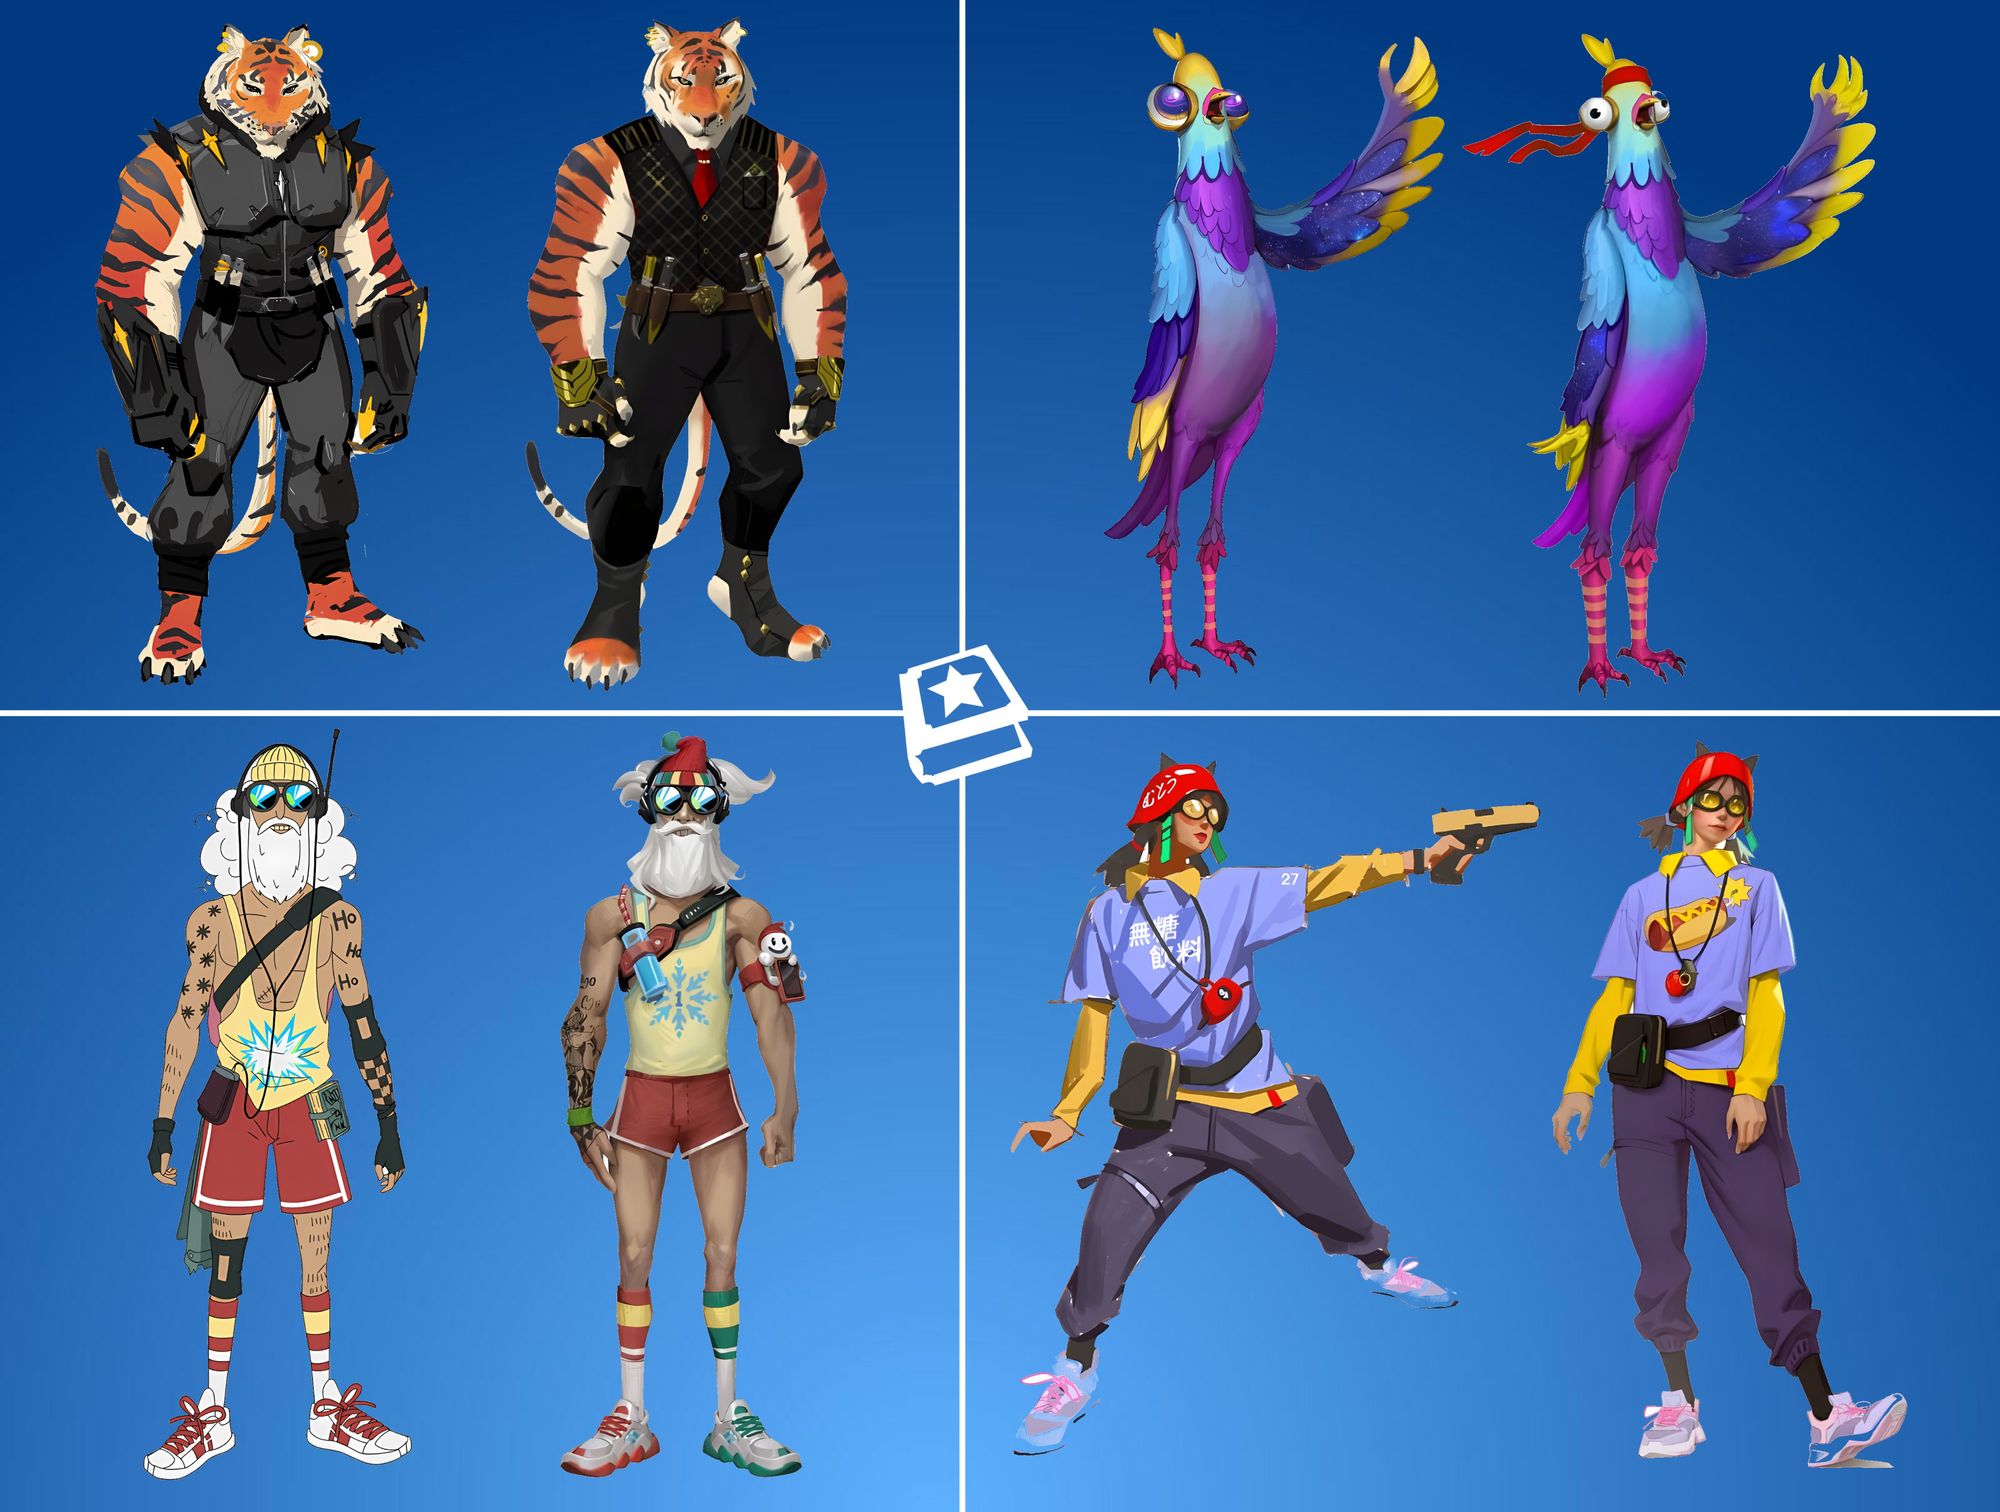 64 Upcoming Outfits Revealed in new Survey